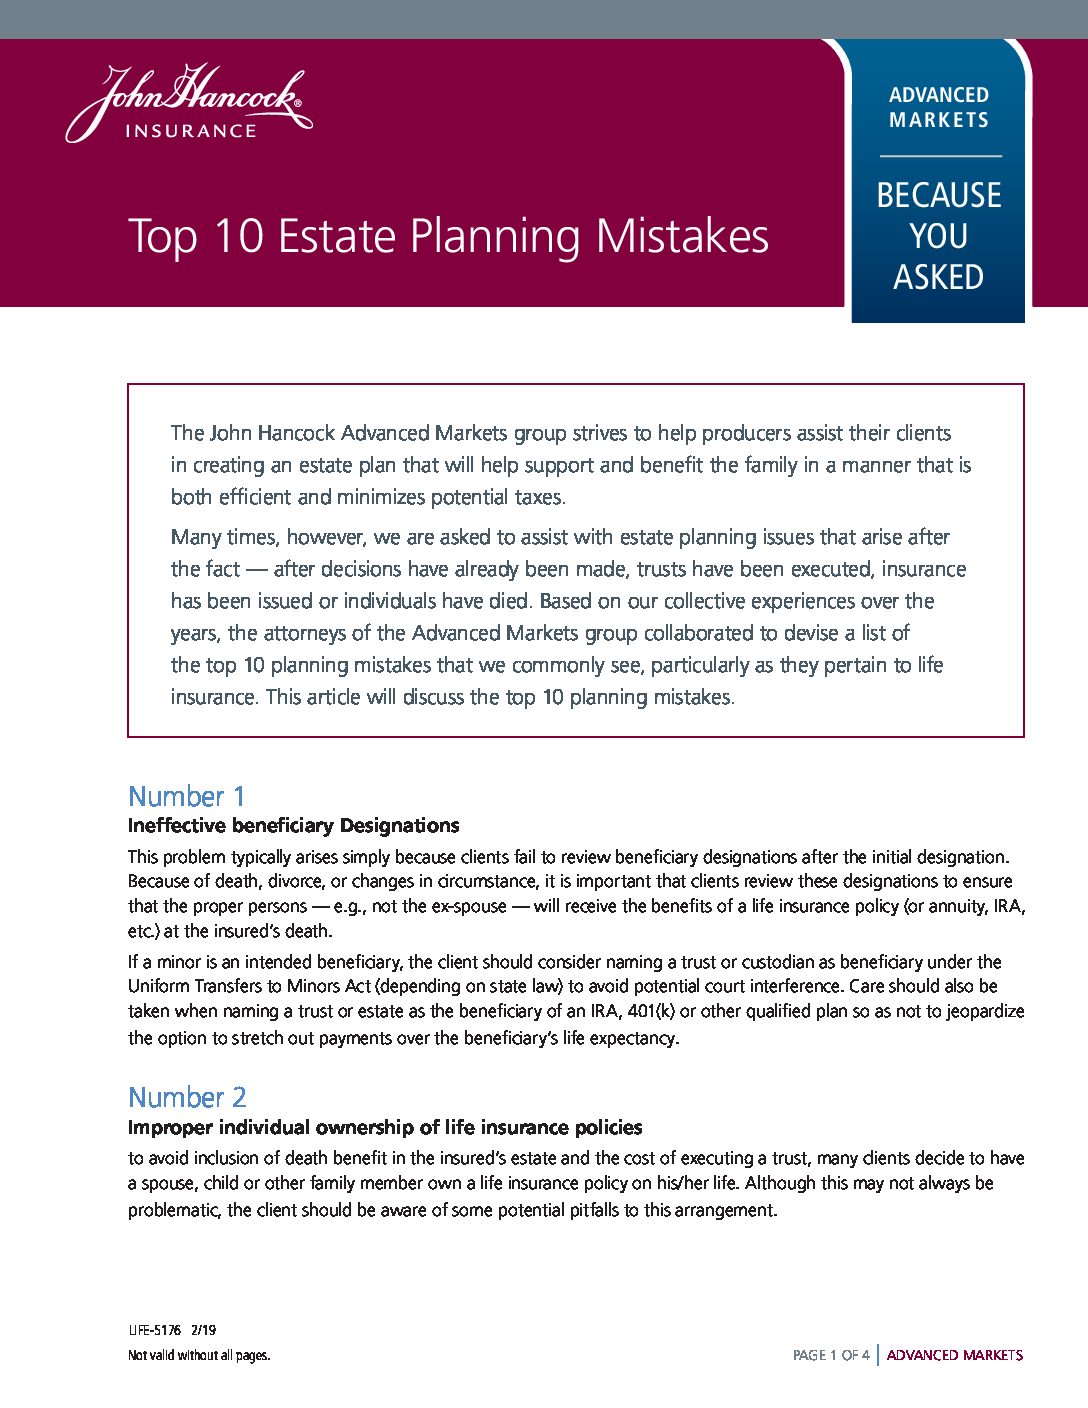 Top 10 Planning Mistakes